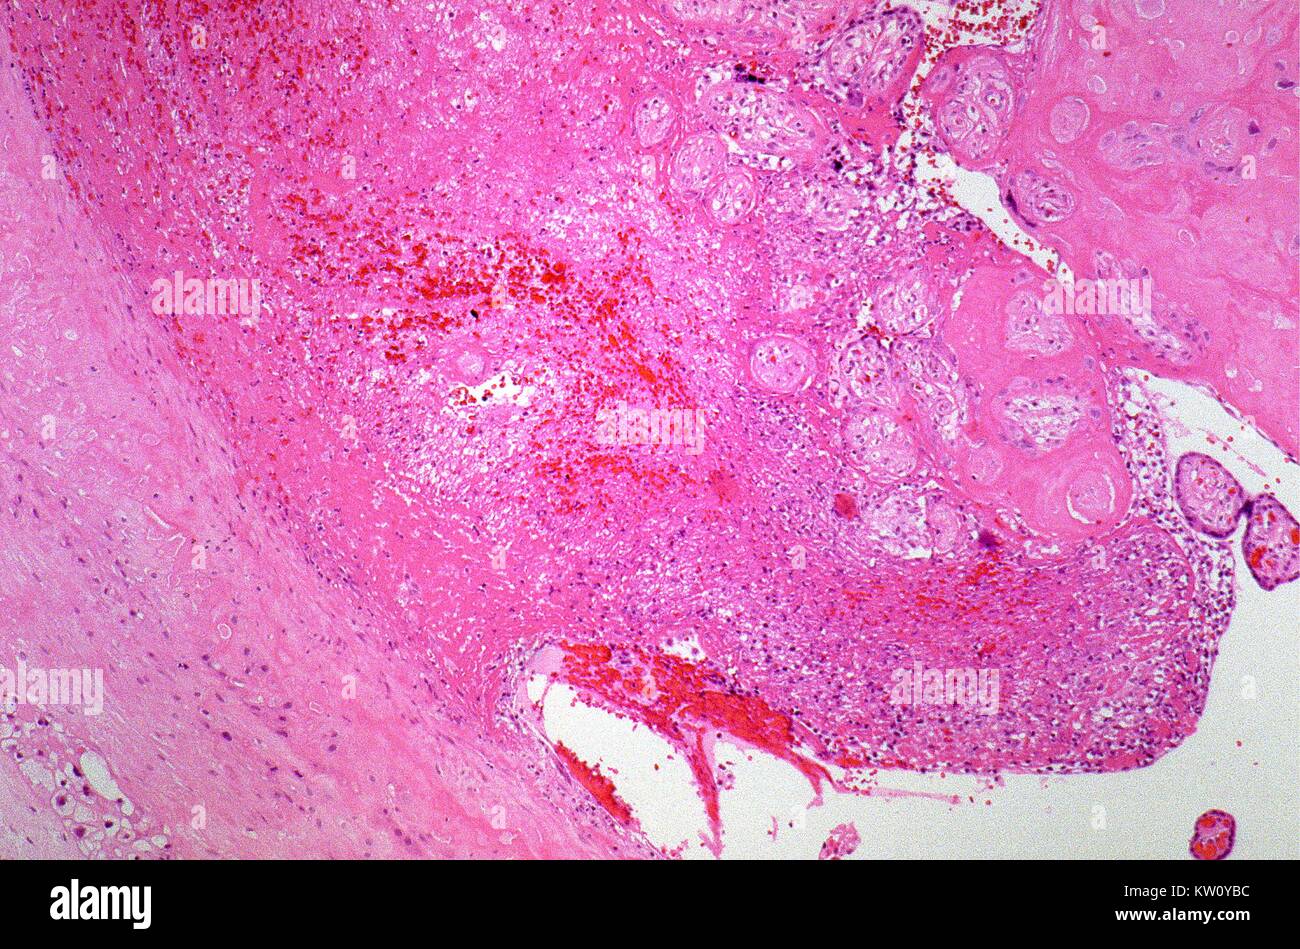 A photomicrograph describing tuberculosis of the placenta. Though a rare circumstance, Mycobacterium tuberculosis mother-to-child transmission can take place through the blood from different regions of the mother's body, or originating from lesions within the placenta as is the case here. Image courtesy CDC/Edwin P. Ewing, Jr. M.D. 1975. Stock Photo